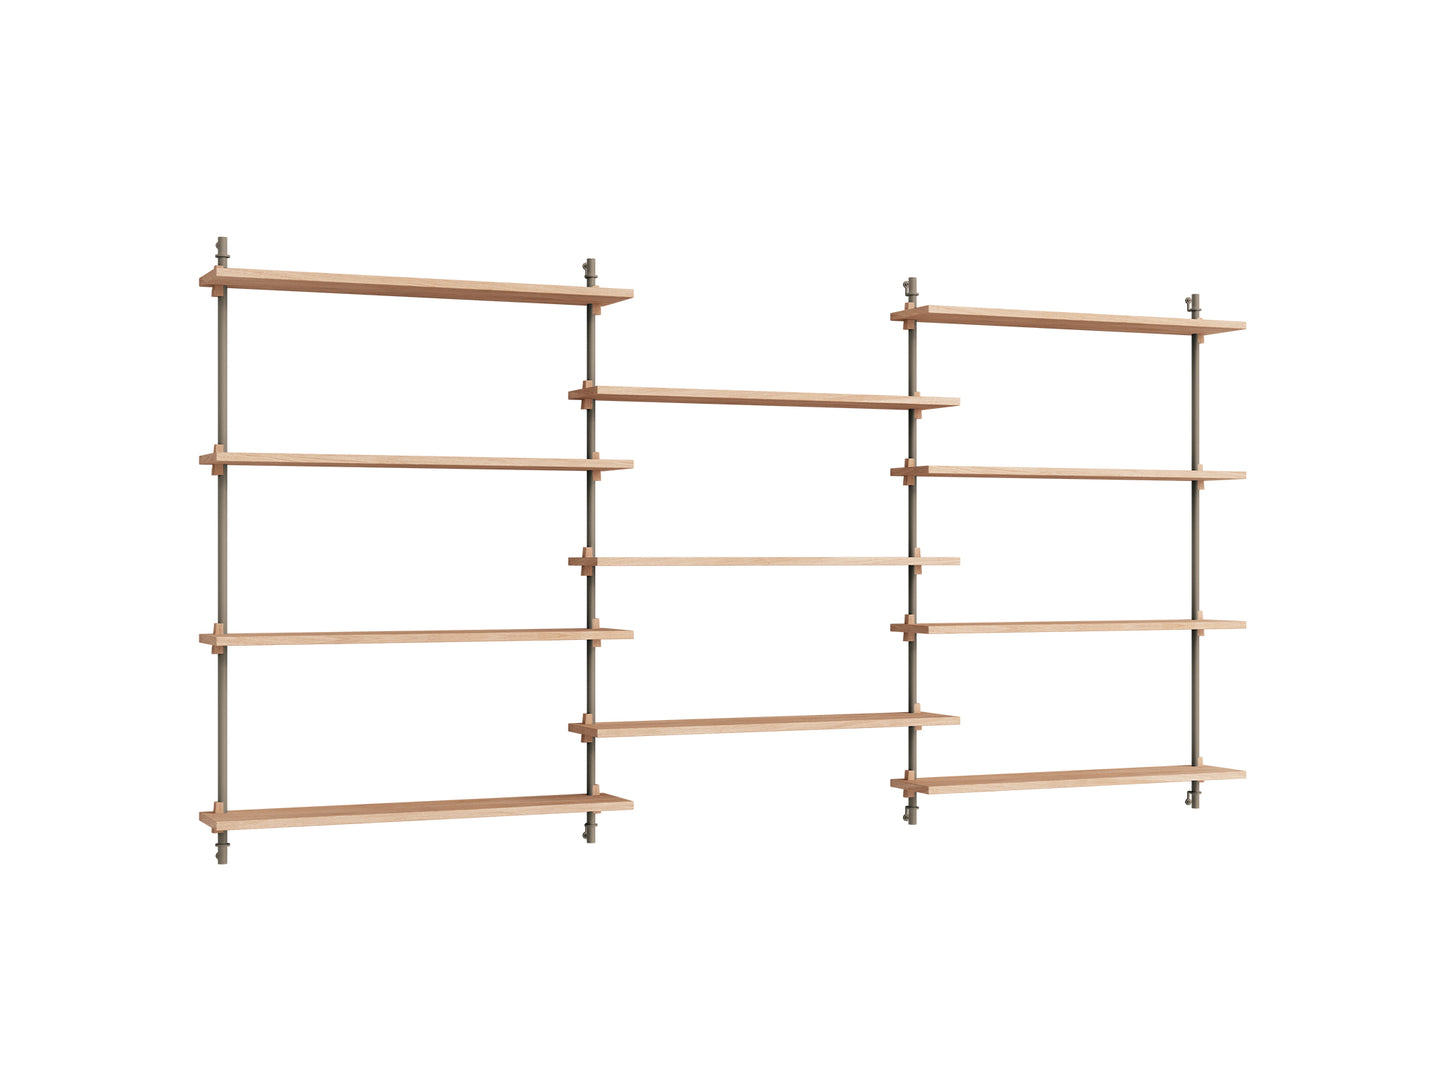 Wall Shelving System Sets (115 cm) by Moebe - WS.115.3 / Warm Grey Uprights / Oiled Oak